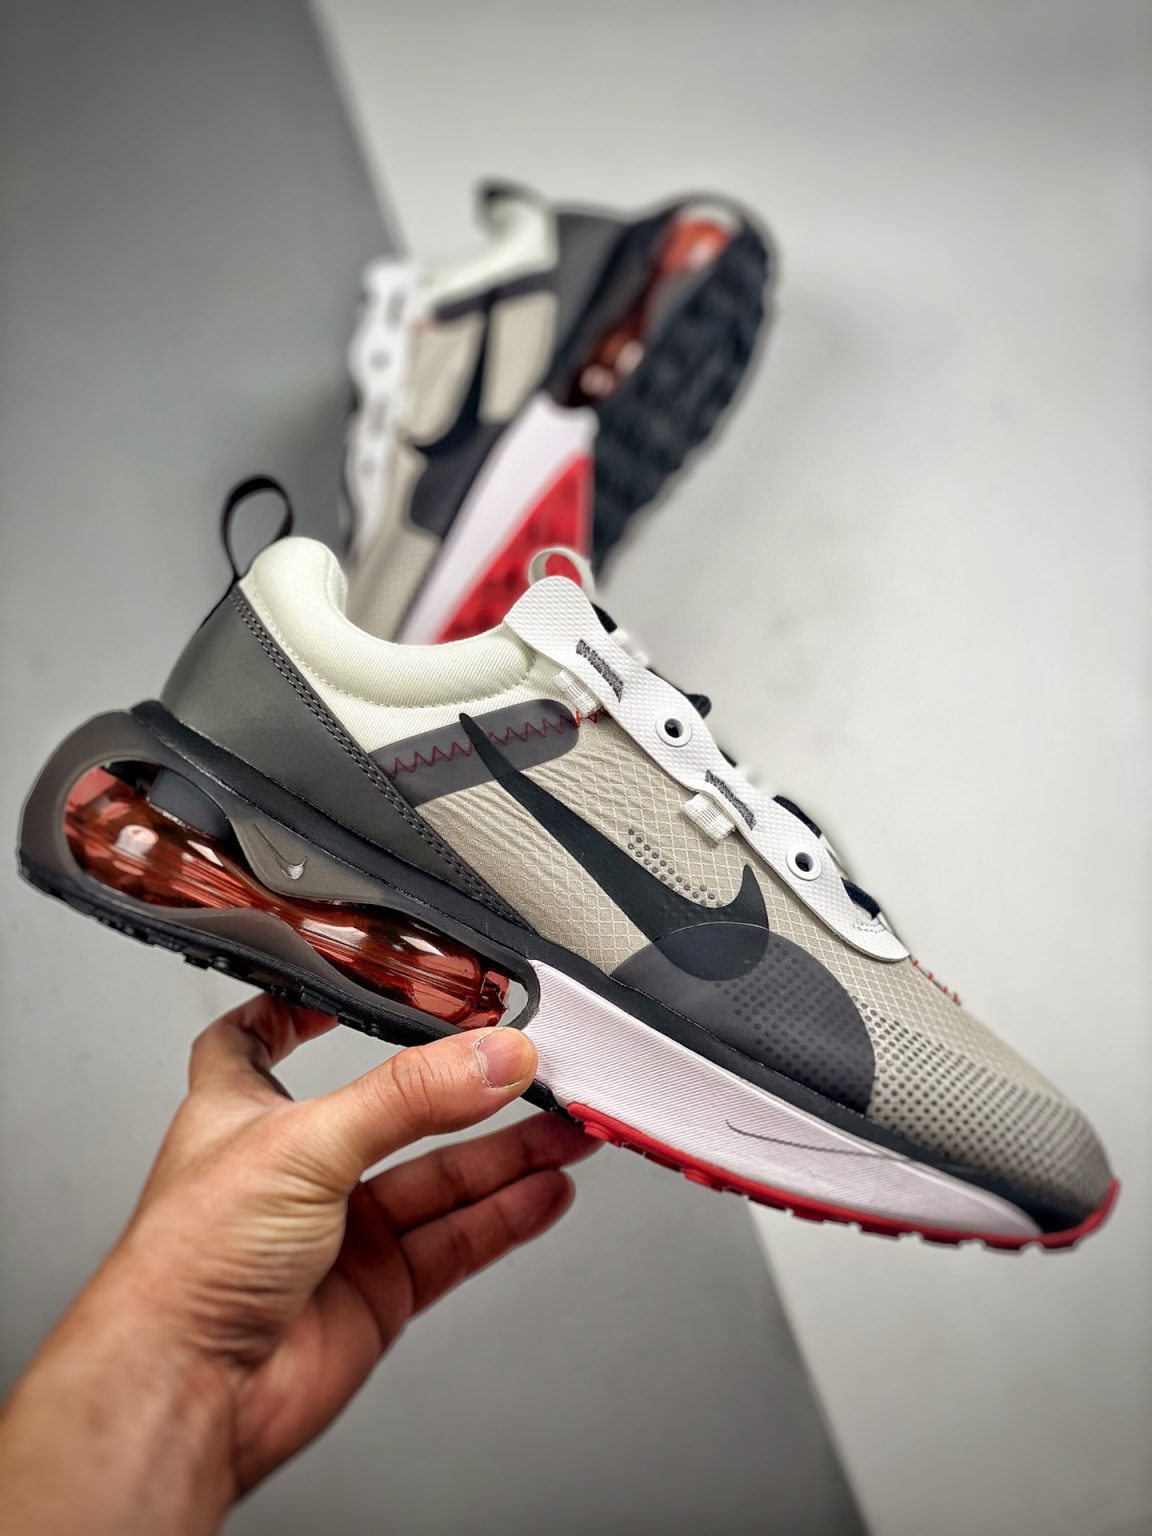 Nike Air Max 2021 SE Photon Dust University Red For Sale Sneaker Hello